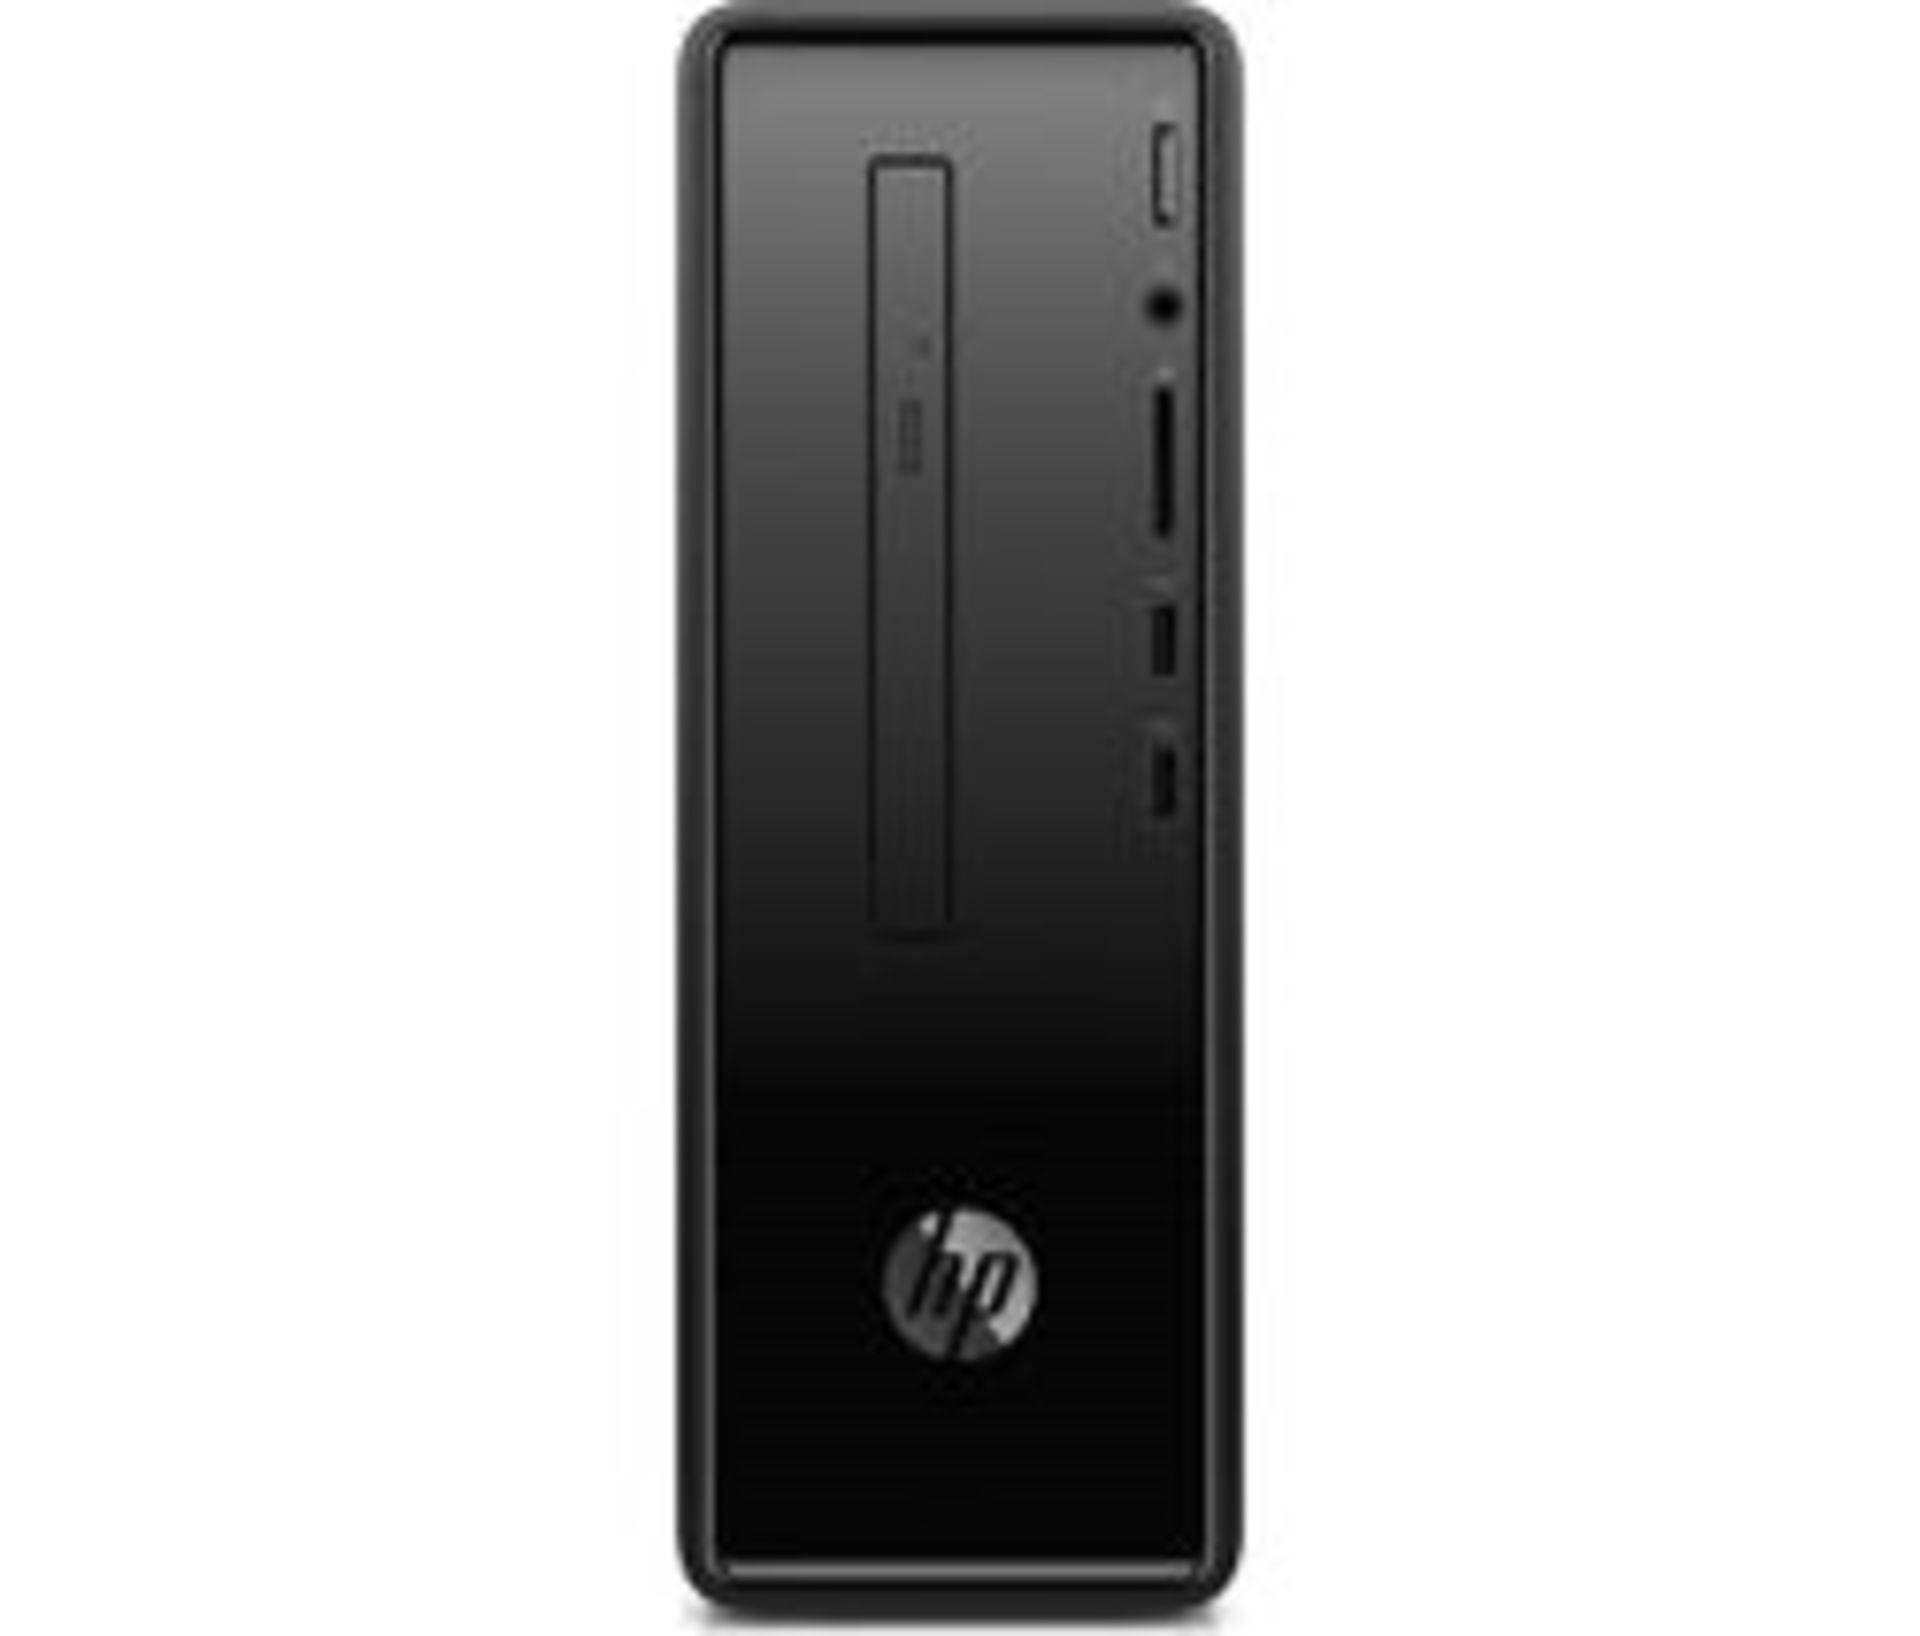 HP SLIM 290-A0008NA SFF PC, AMD A9-9425 CPU, 8GB RAM, 256GB SSD, DATA WIPED & WIN 11 INSTALLED, WITH